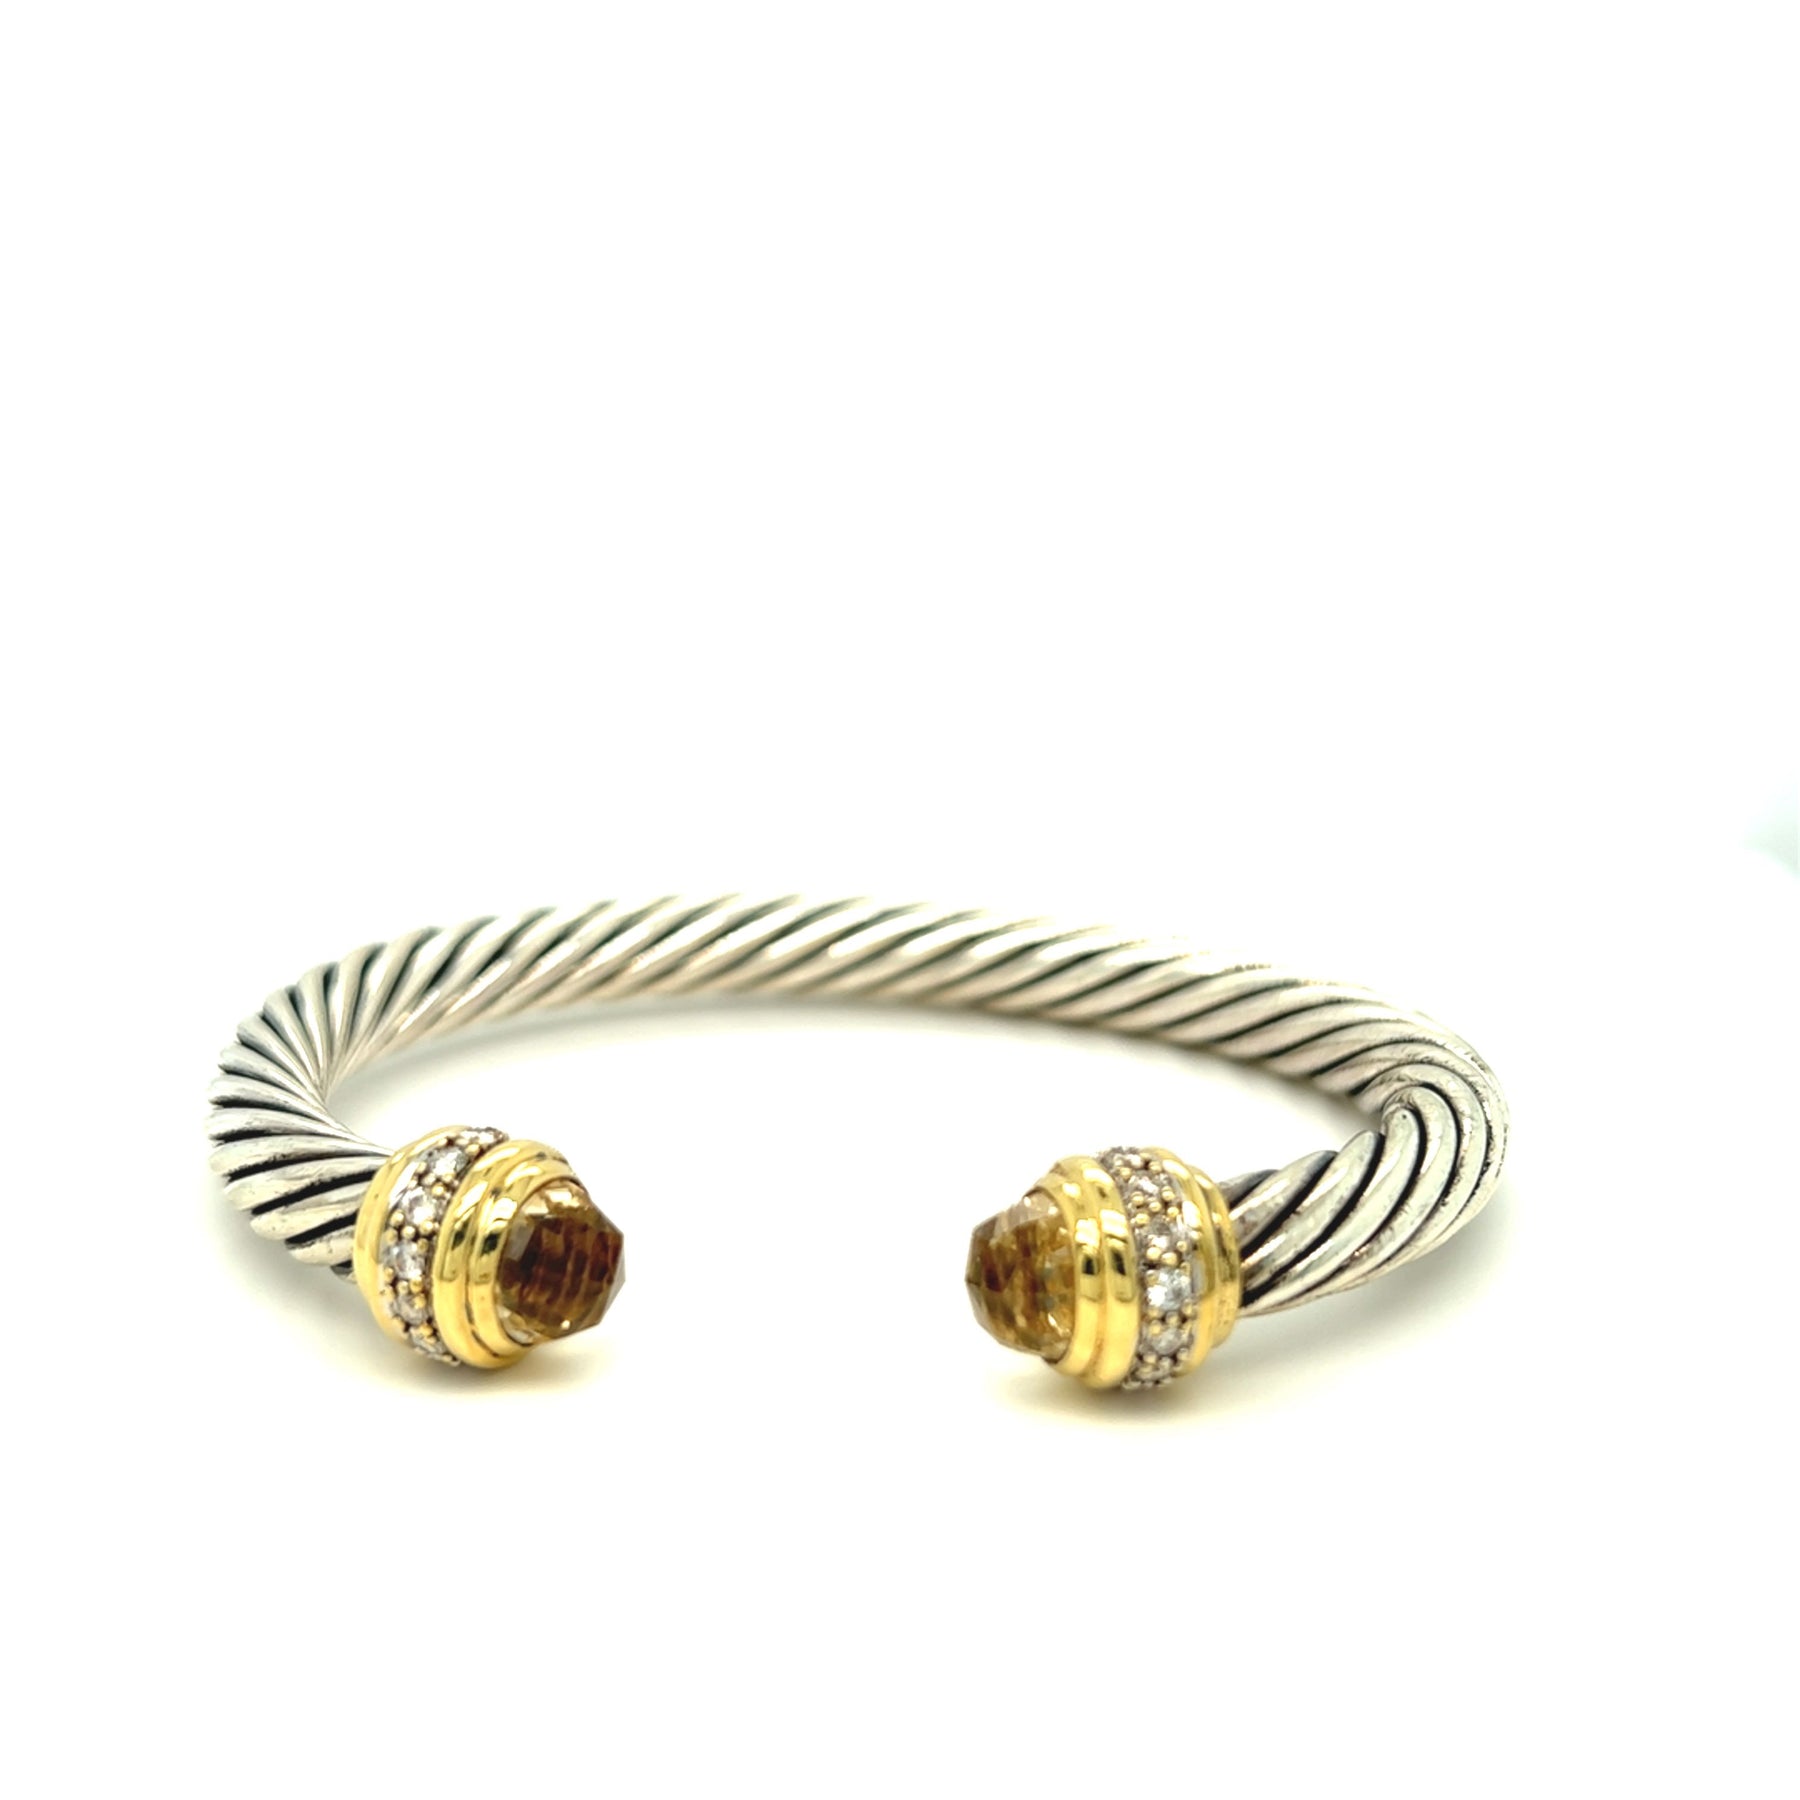 David Yurman and Diamond Citrine and Forever Cuff Are Cable Bracelet Gems Silver Bangle –